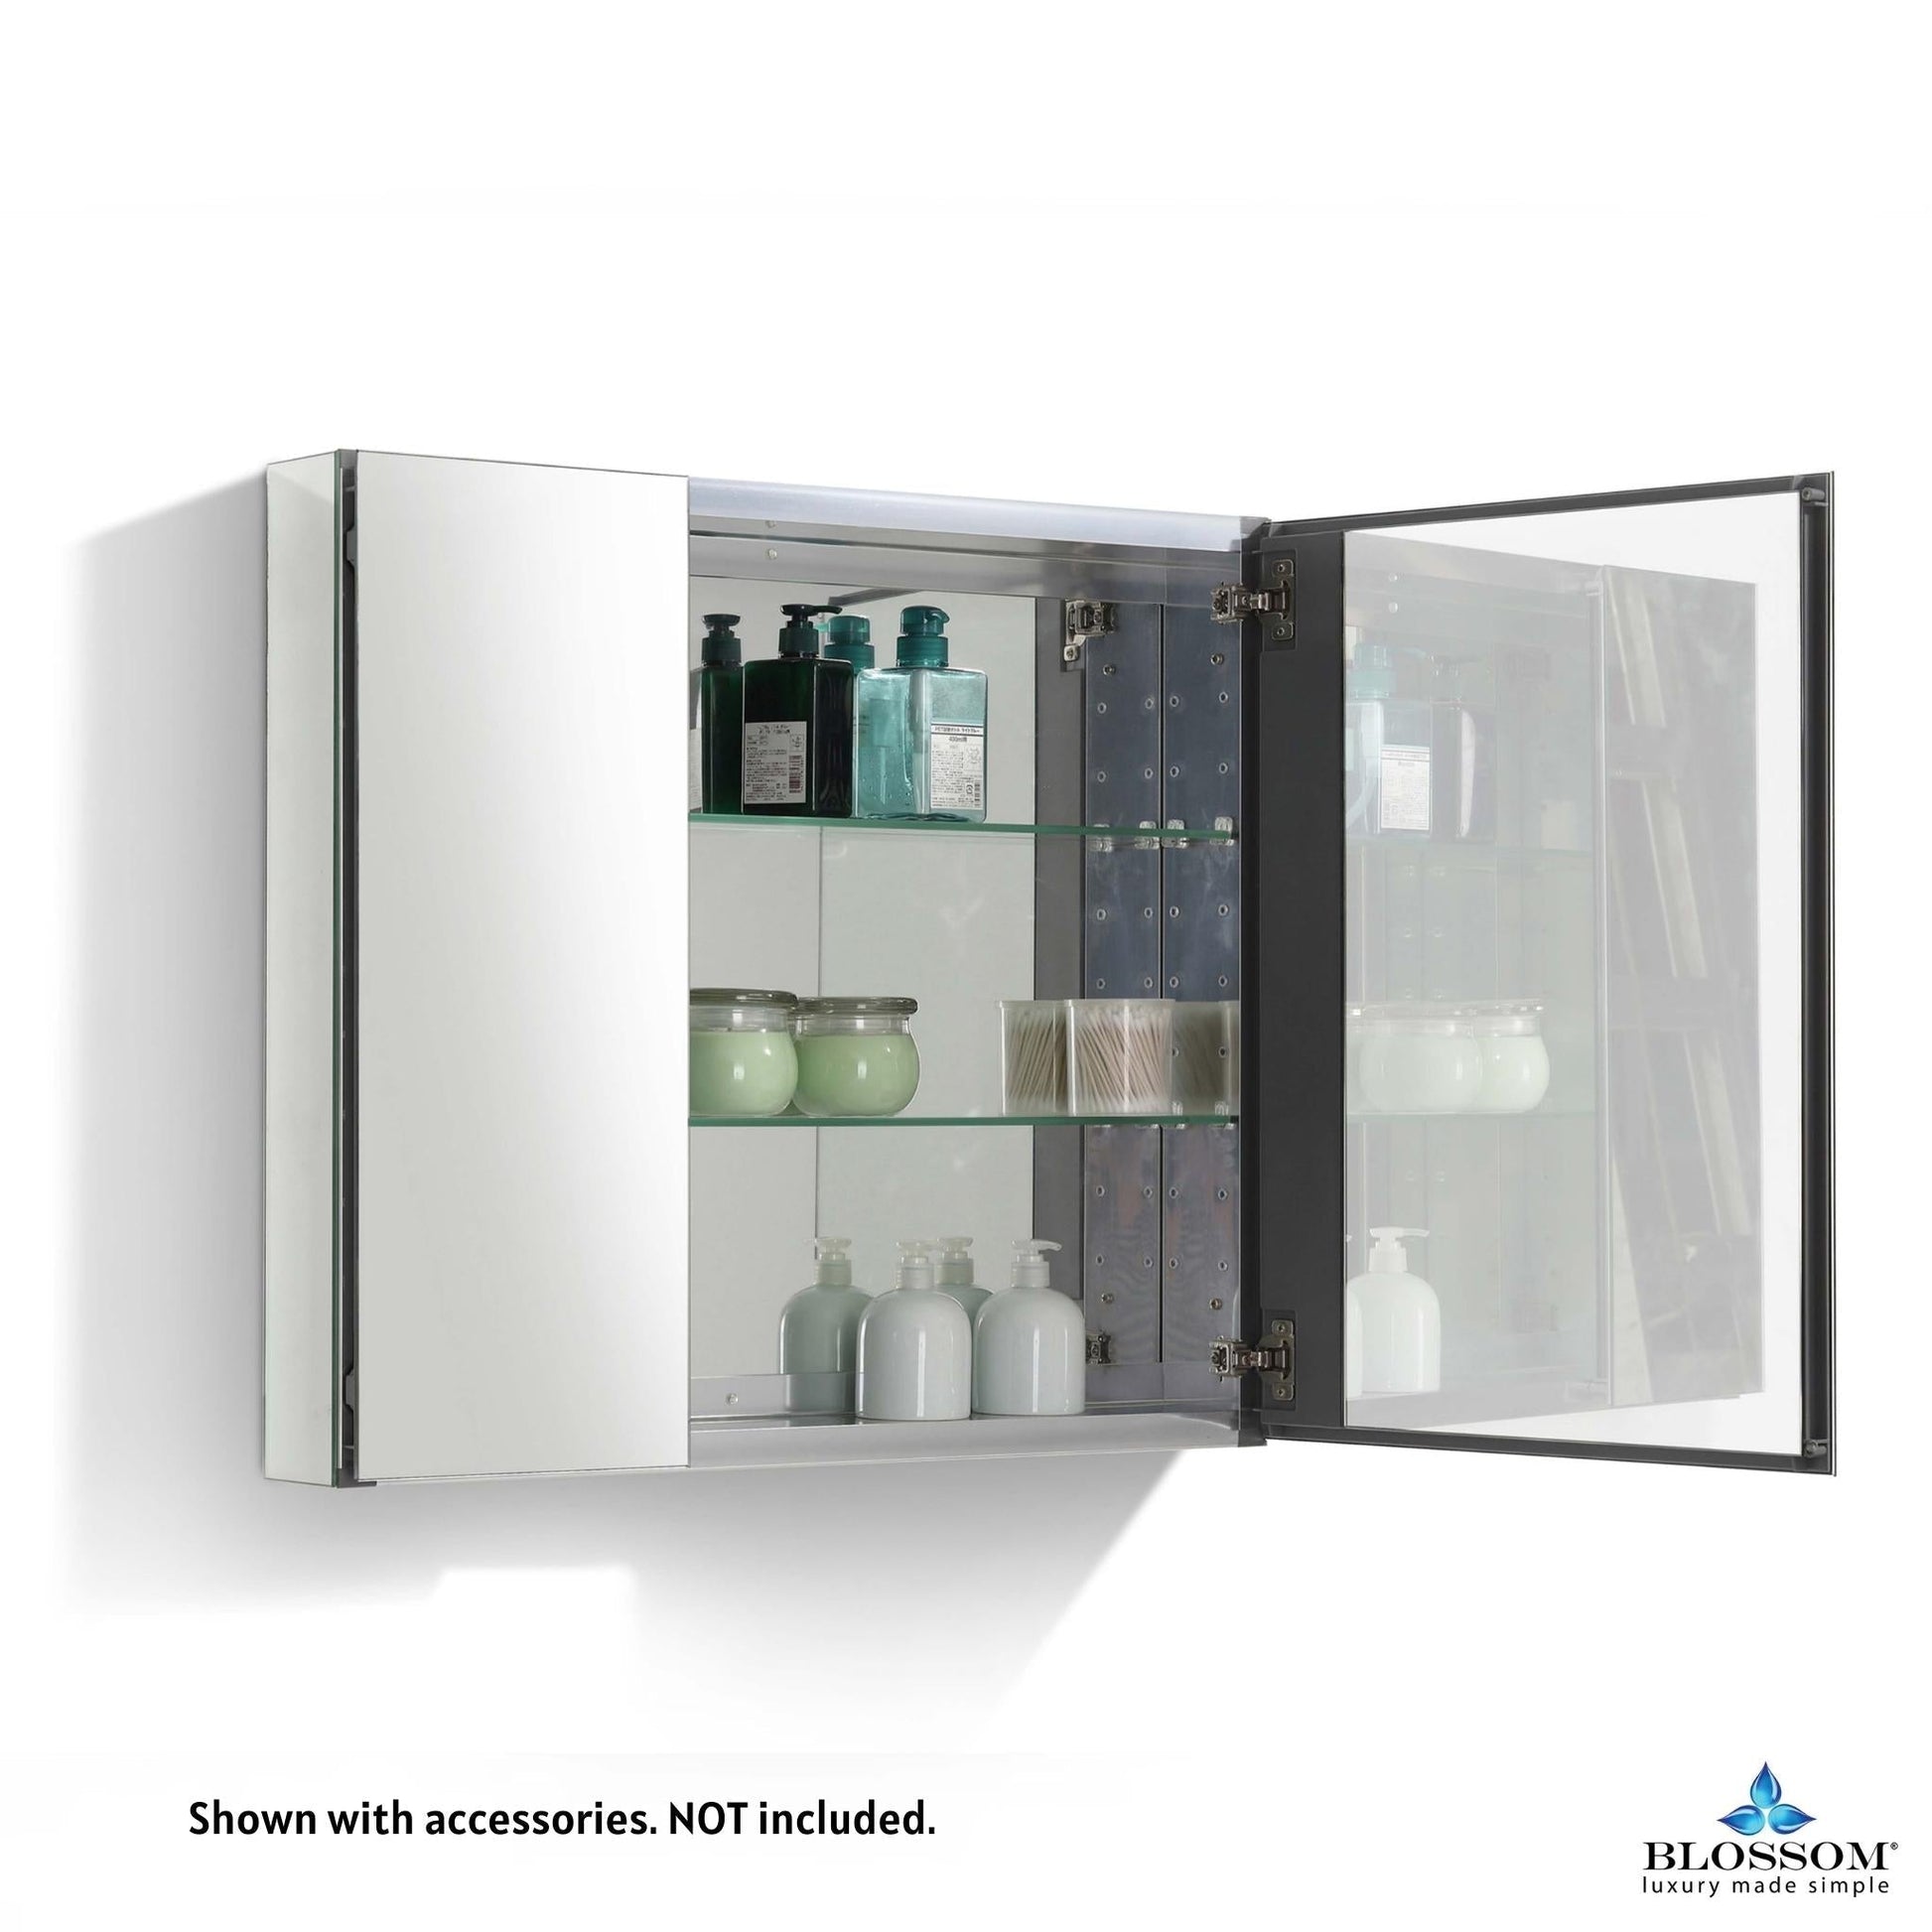 Blossom MC7 25" x 26" Recessed or Surface Mount 2-Door Aluminum Medicine Cabinet With Mirror, 2 Adjustable Glass Shelves and Soft-Closing Hinges